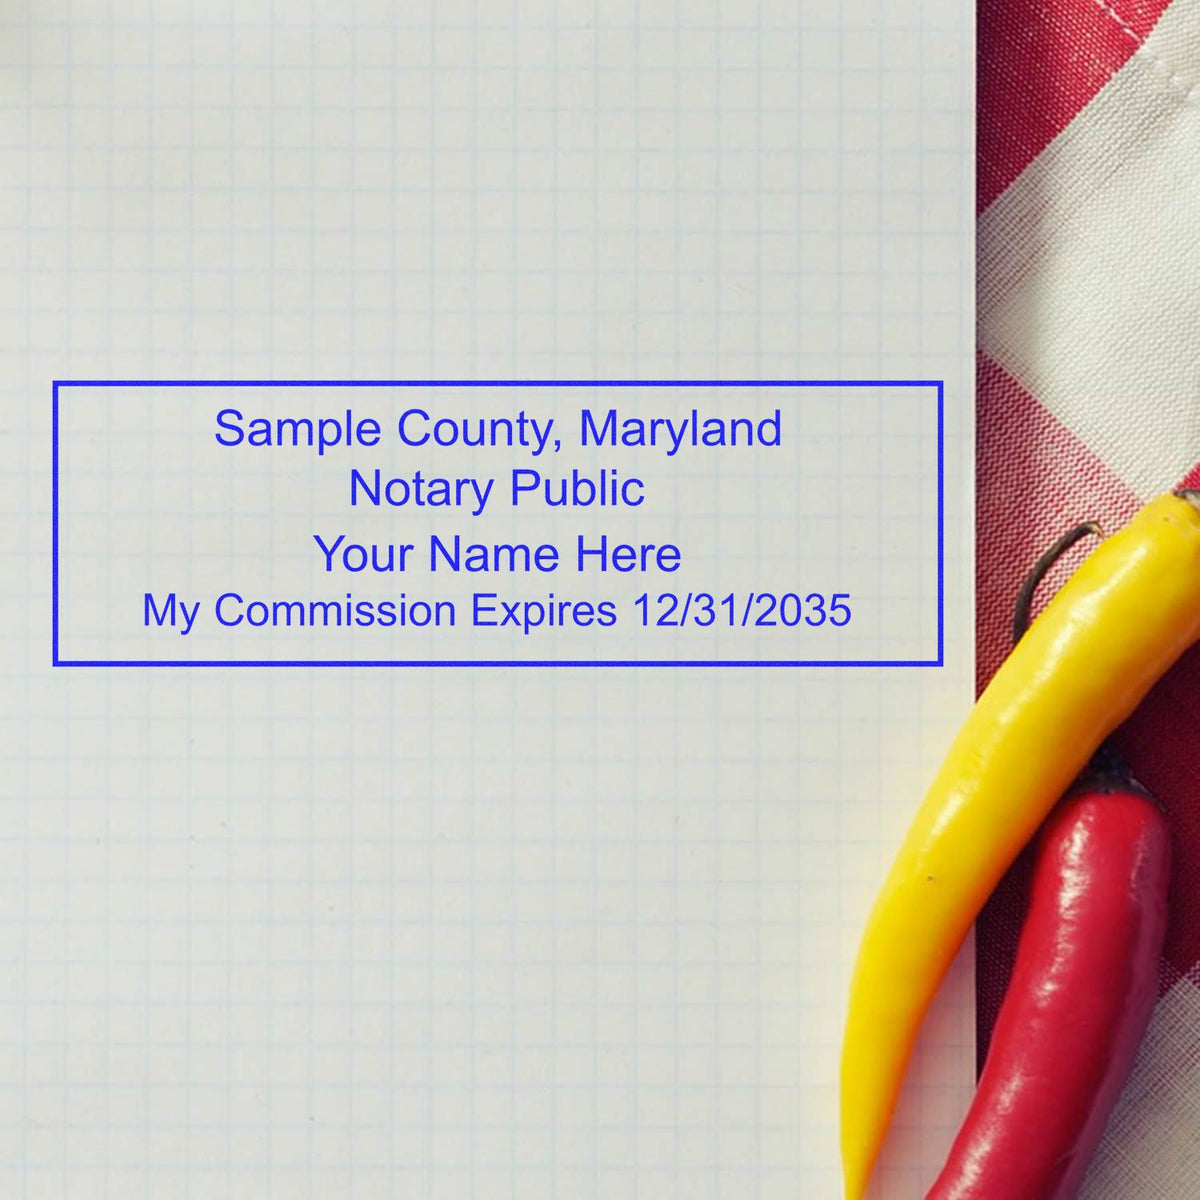 A photograph of the Heavy-Duty Maryland Rectangular Notary Stamp stamp impression reveals a vivid, professional image of the on paper.